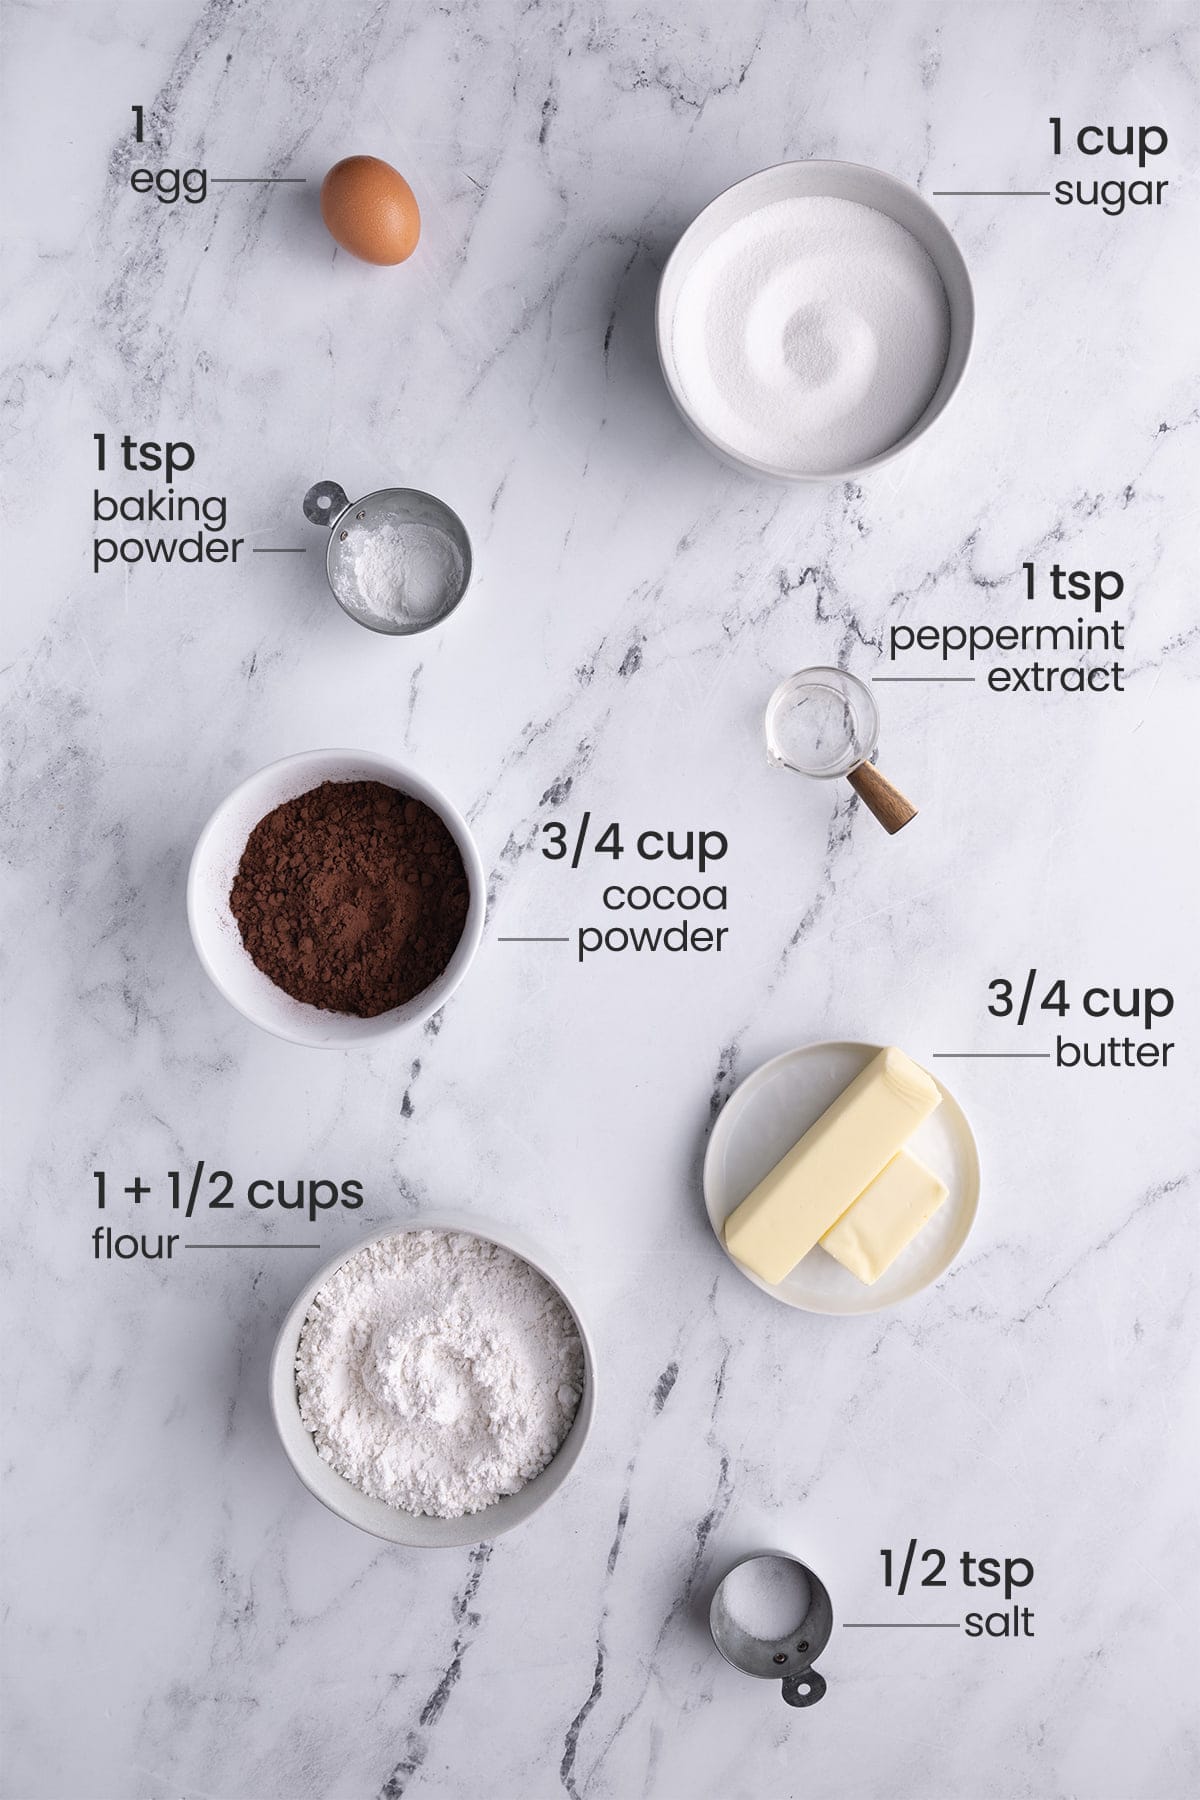 ingredients for Chocolate Peppermint Christmas Cookies - egg, sugar, baking powder, peppermint extract, cocoa powder, butter, flour, salt